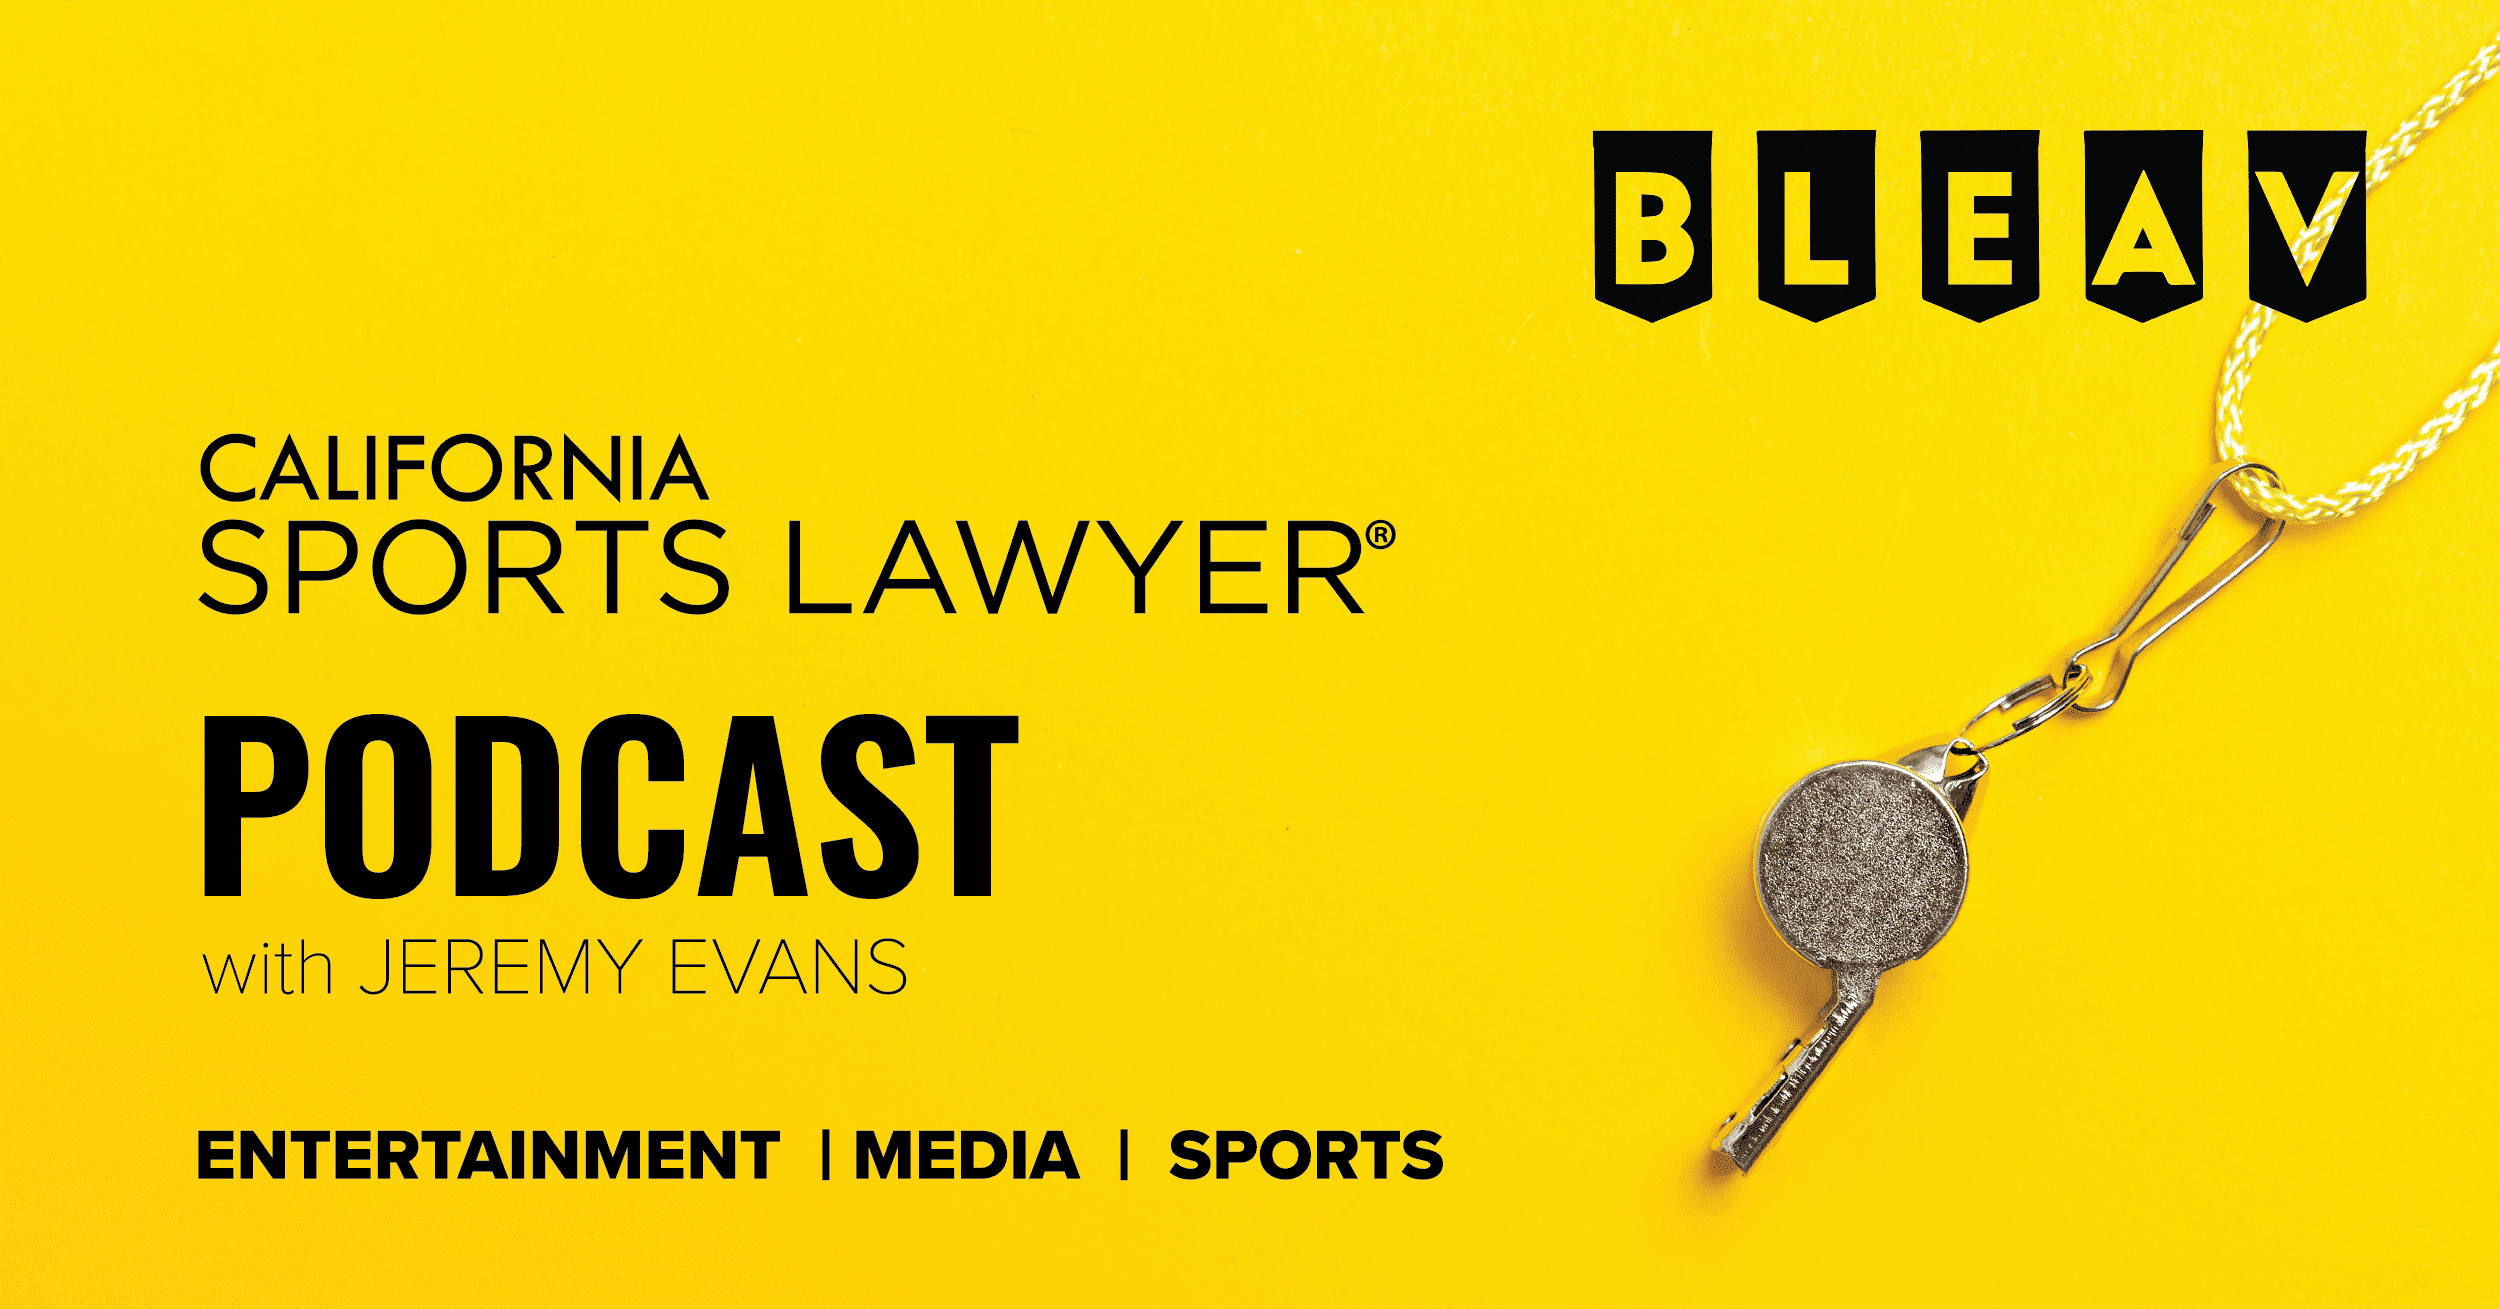 California Sports Lawyer® Podcast with Jeremy Evans: Privacy and Contract Law defining Sports and Entertainment Landscape